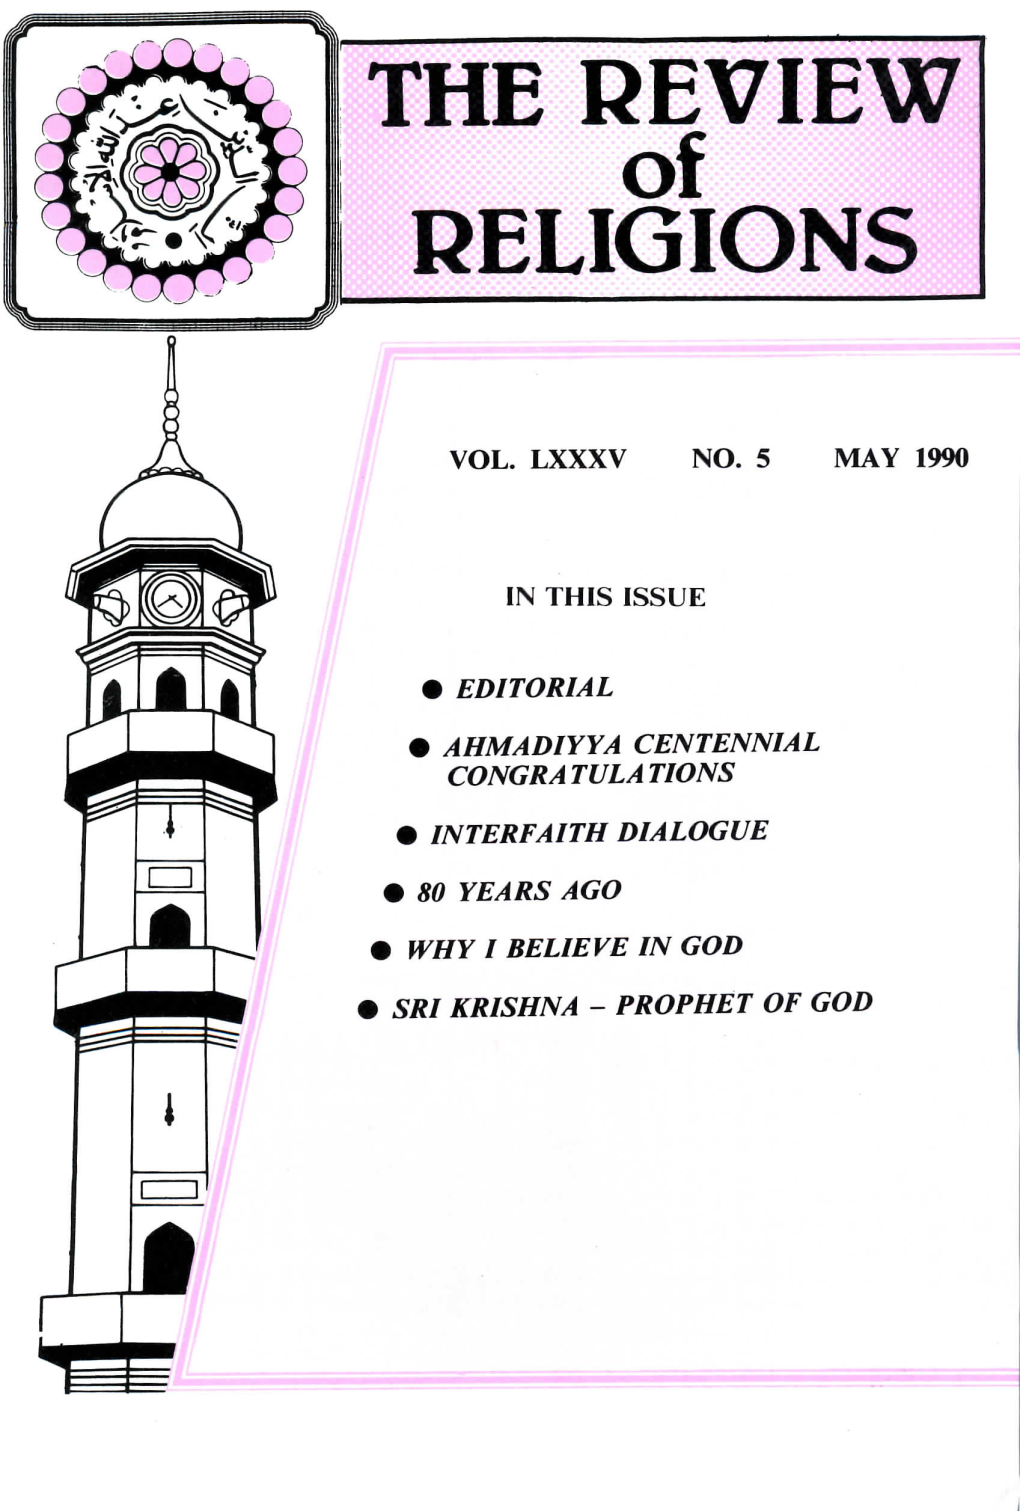 The Review of Religions, May 1990